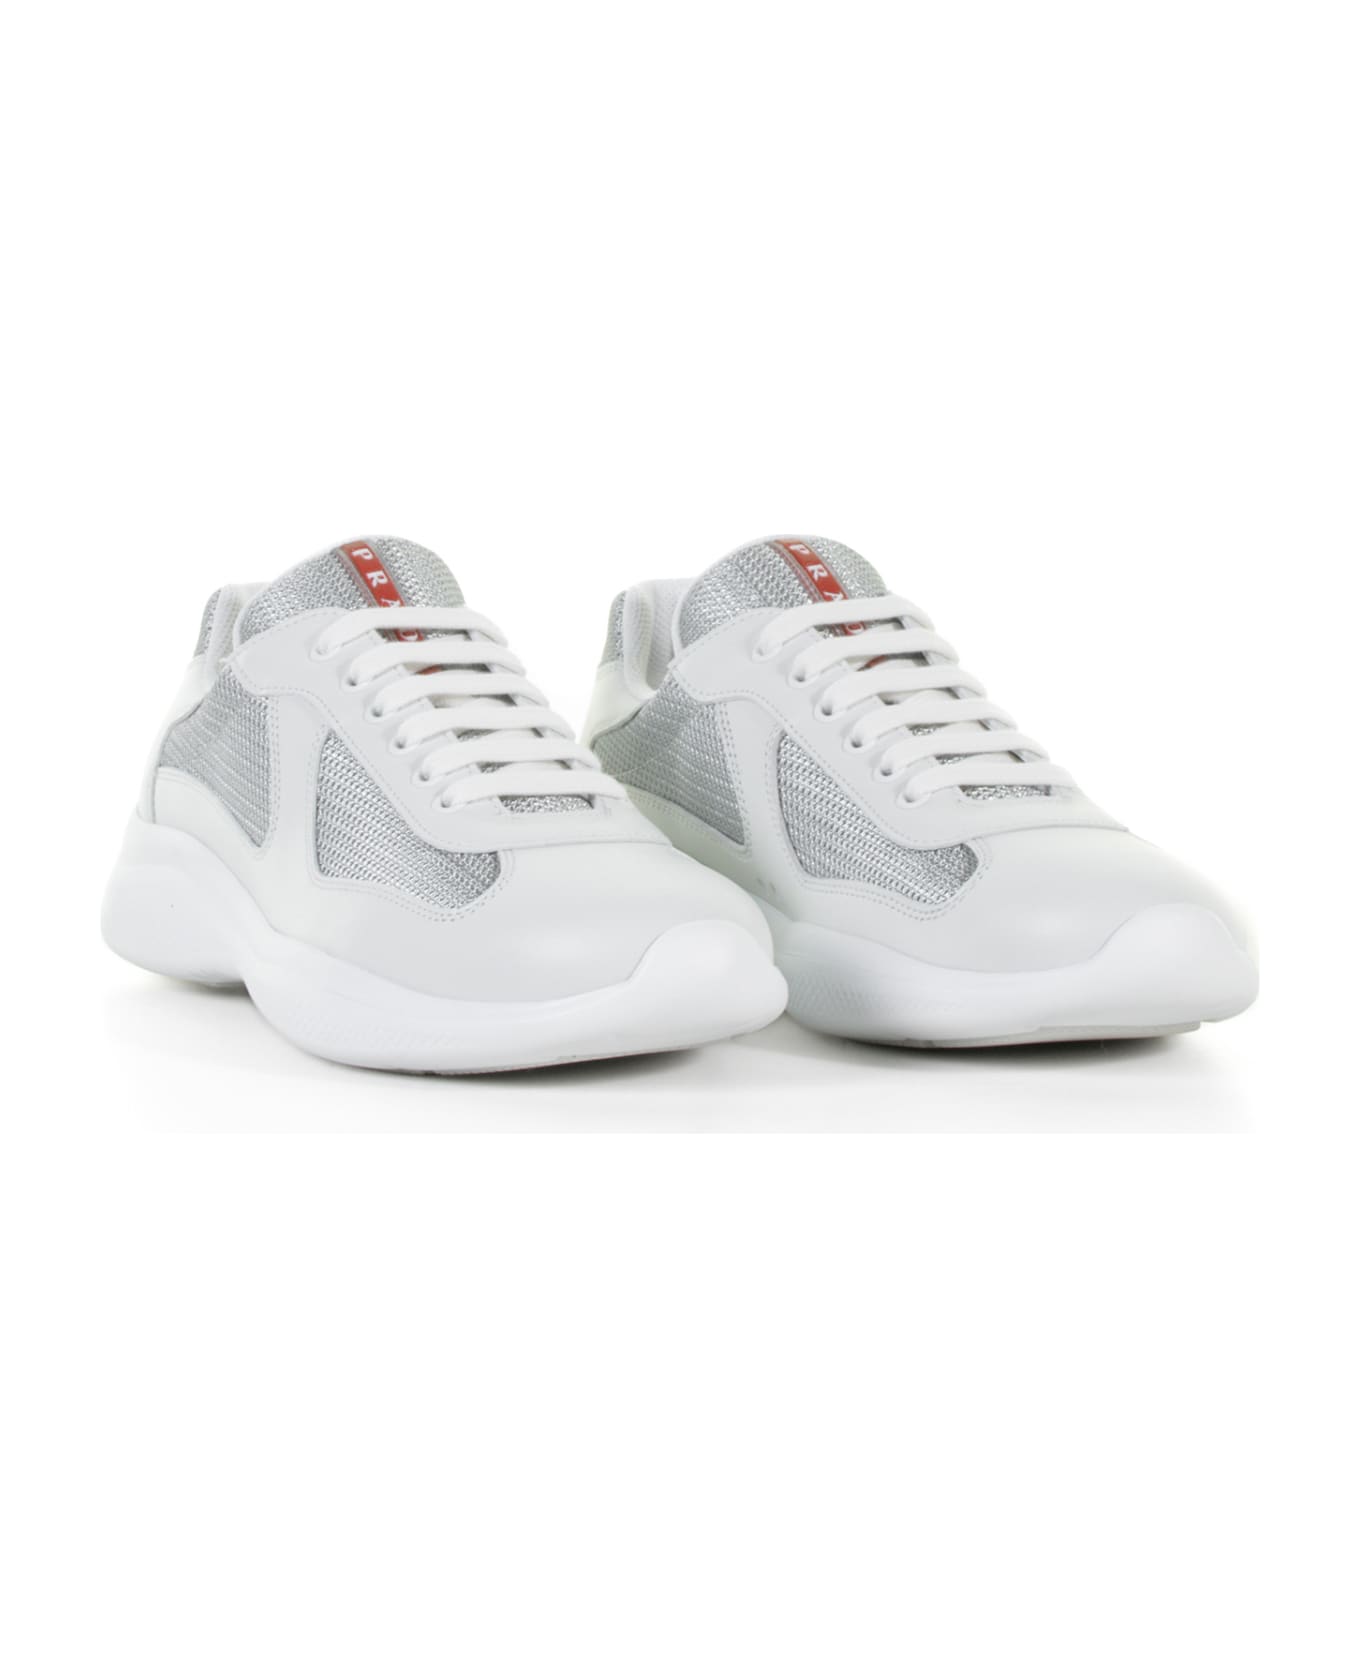 Prada America's Cup Sneakers With Linea Rossa Logo - Bianco/argento スニーカー